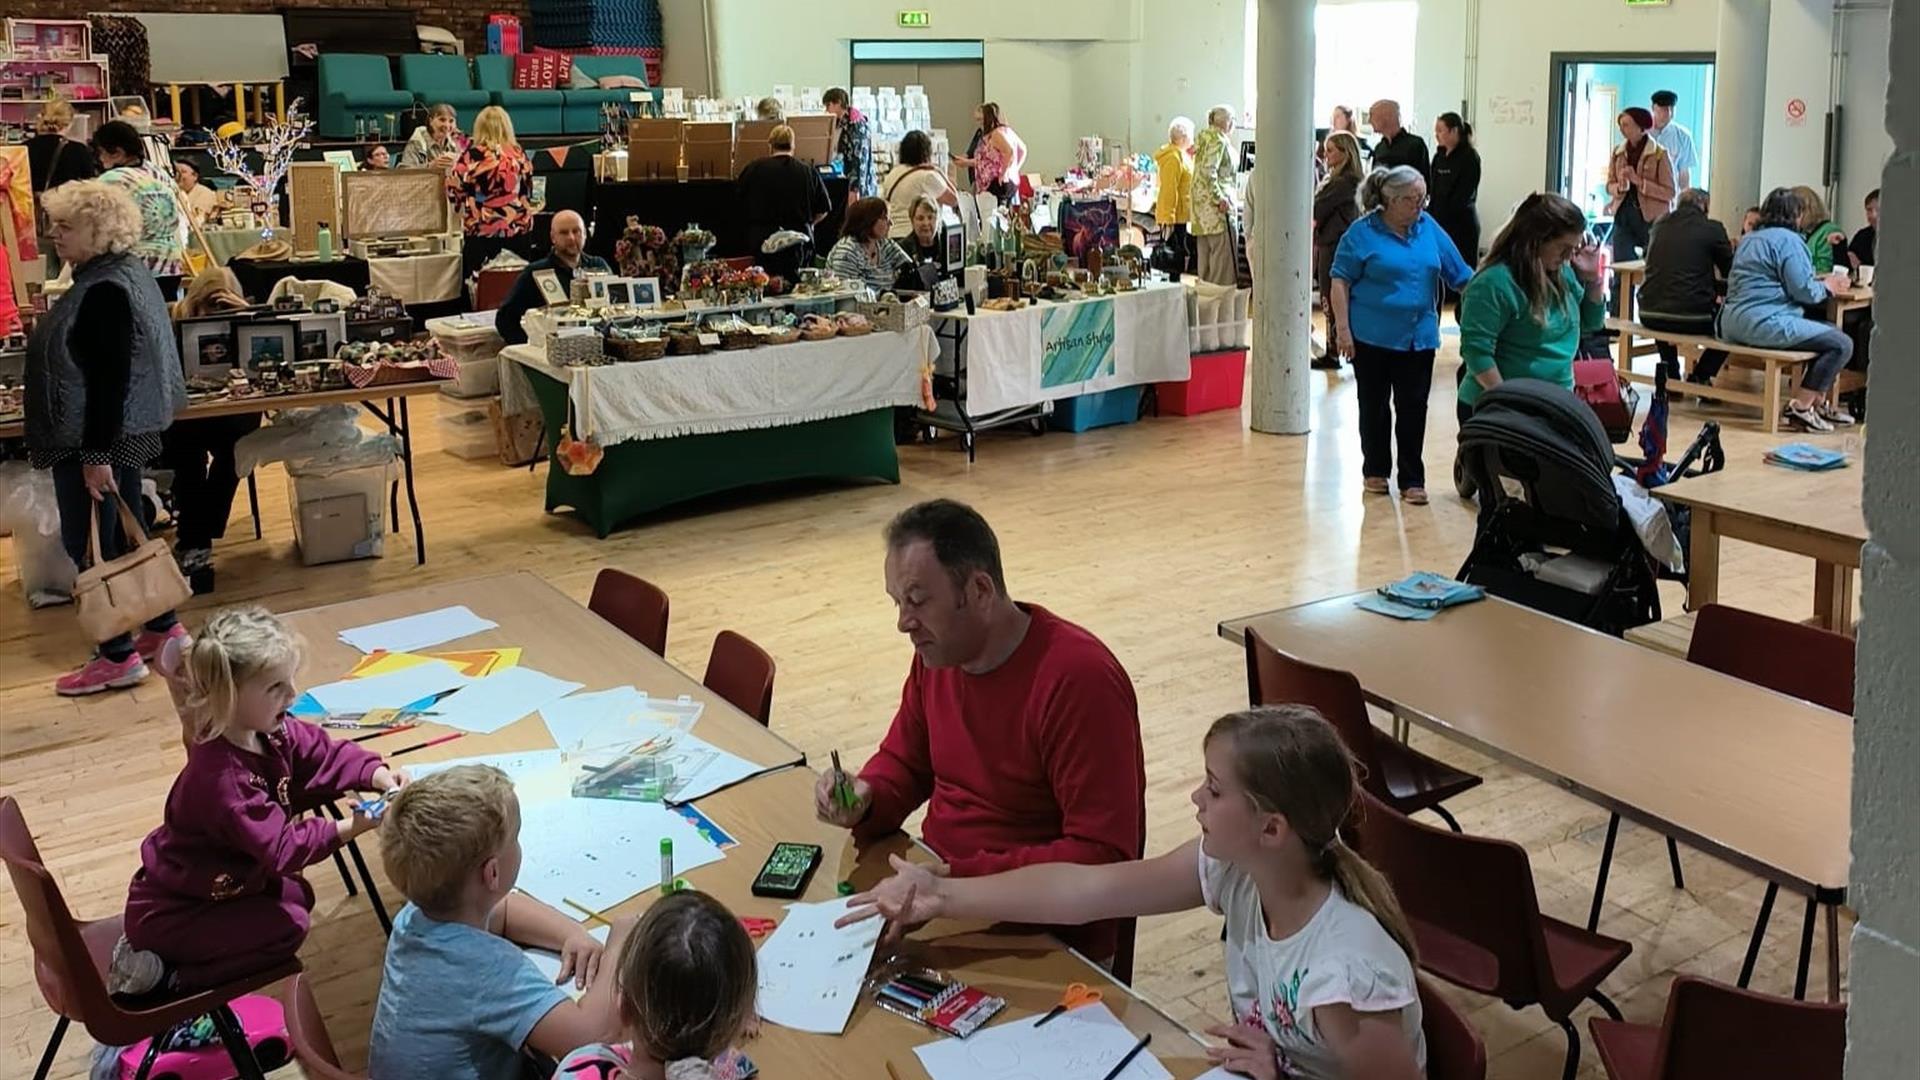 Hall filled with crafters and people undertaking activities